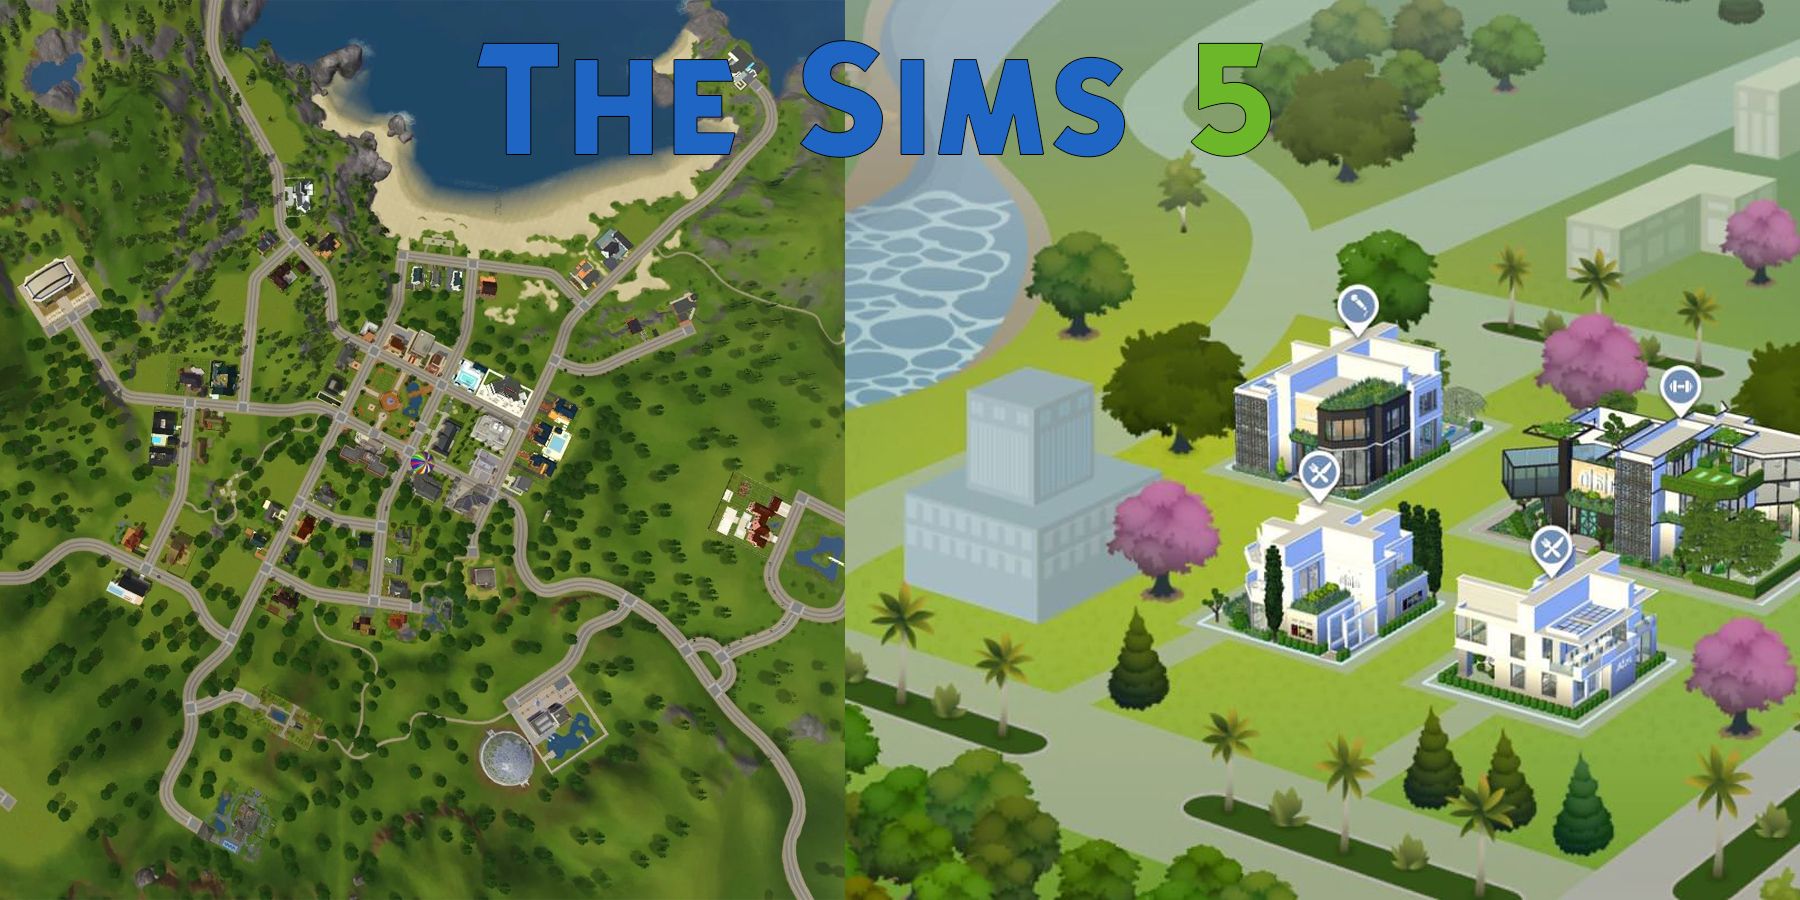 The Sims 5 – Will We See It in 2022?